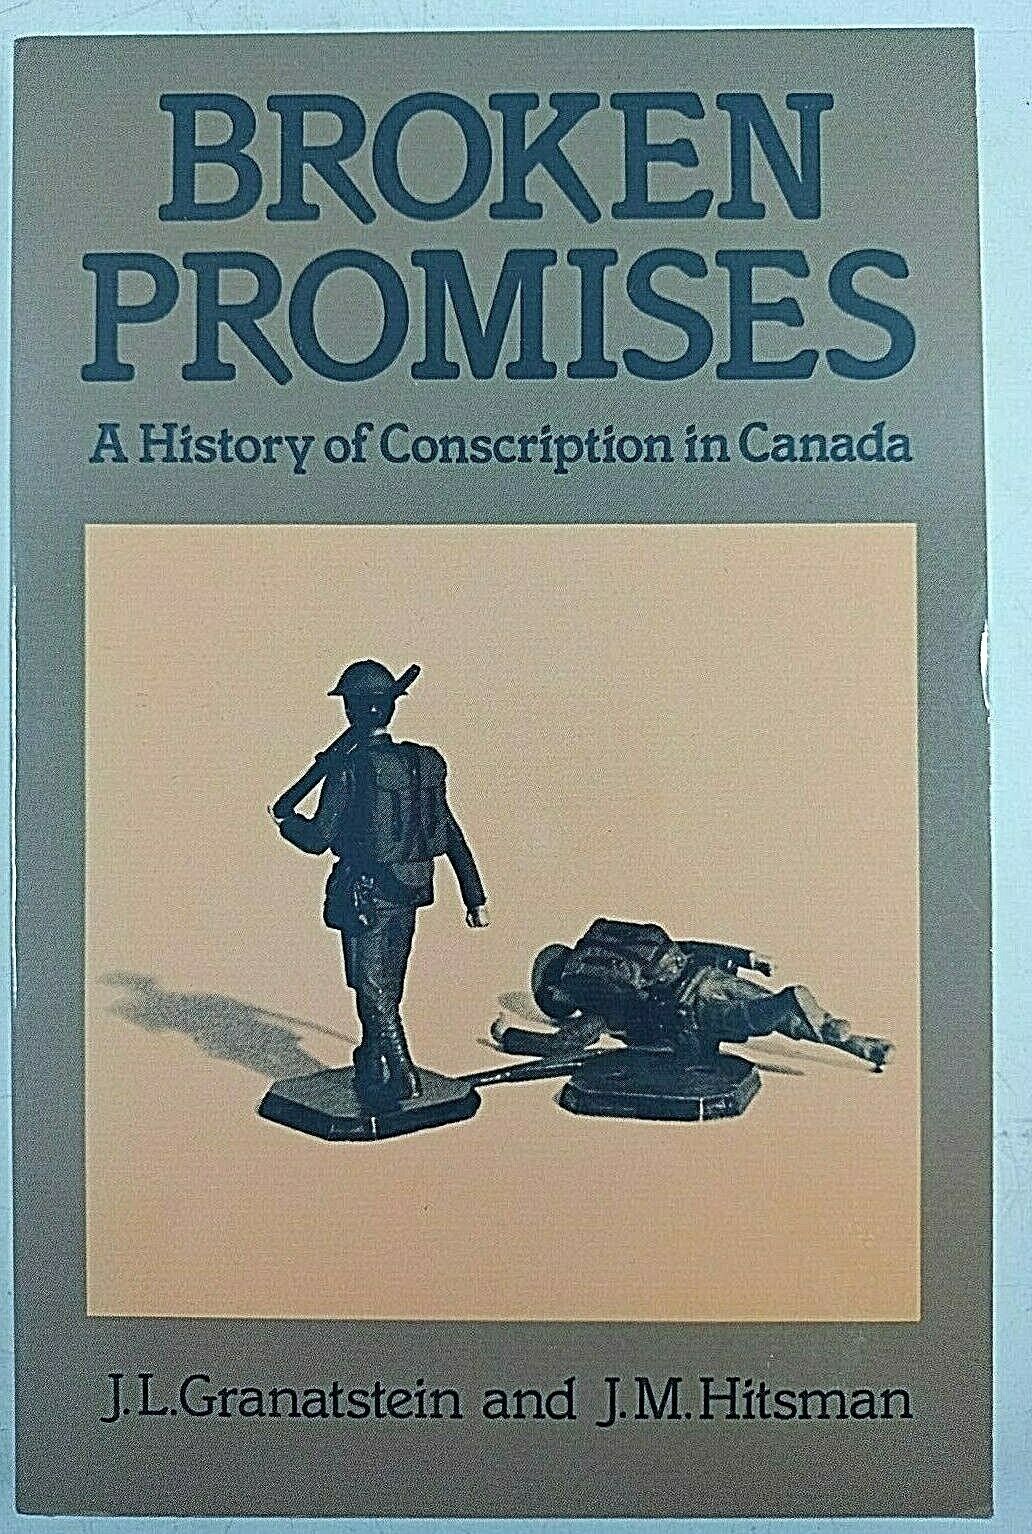 WW1 WW2 Cold War Canadian Broken Promises History of Conscription Reference Book